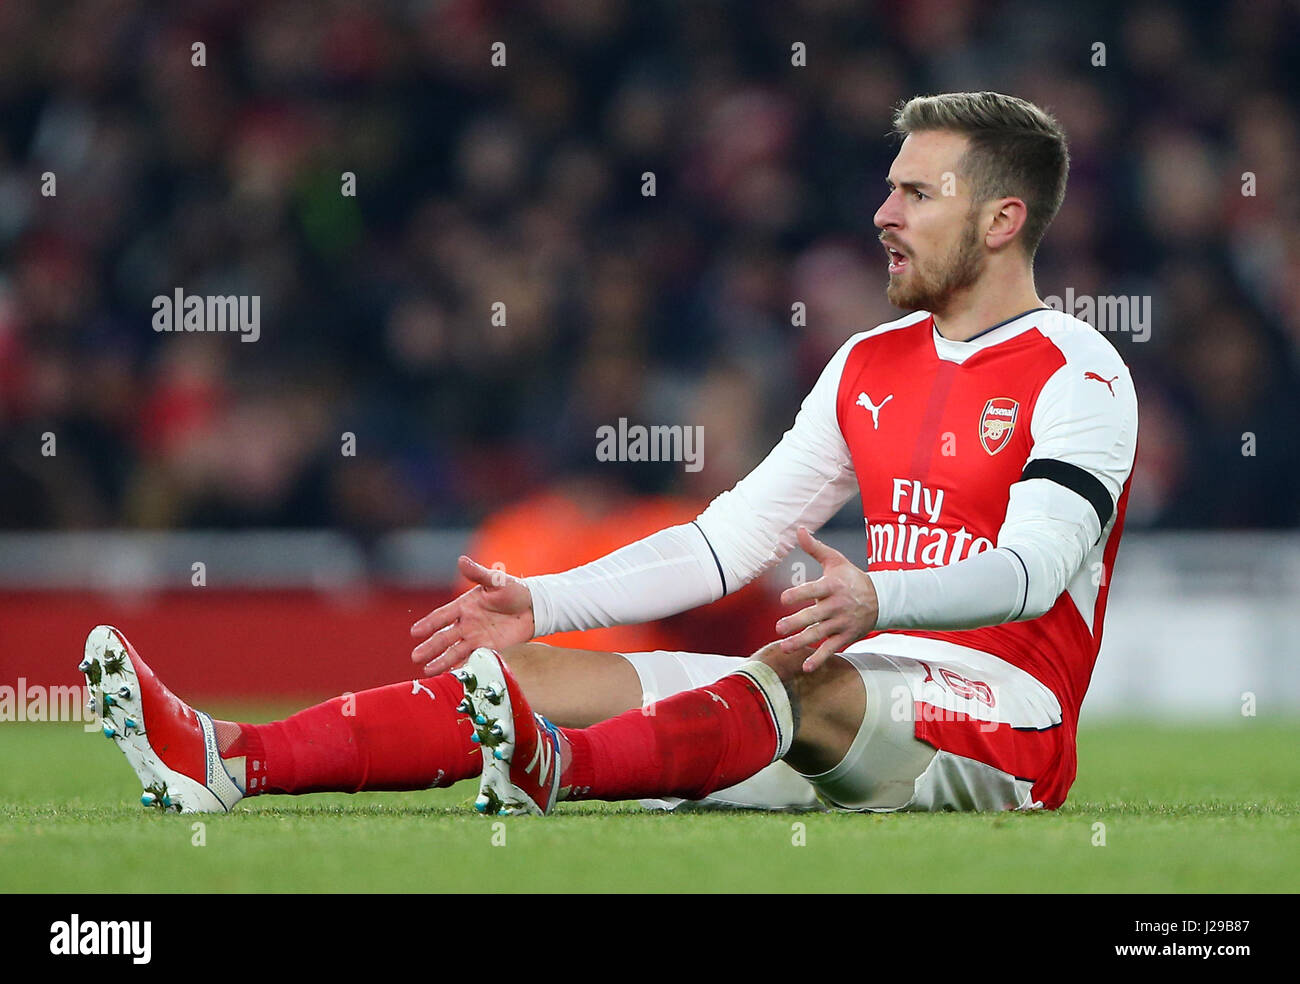 Arsenals Aaron Ramsey during the EFL Cup Quater-final match between Arsenal and Southampton at the Emirates Stadium in London. November 30, 2016. EDITORIAL USE ONLY - FA Premier League and Football League images are subject to DataCo Licence see www.football-dataco.com Stock Photo